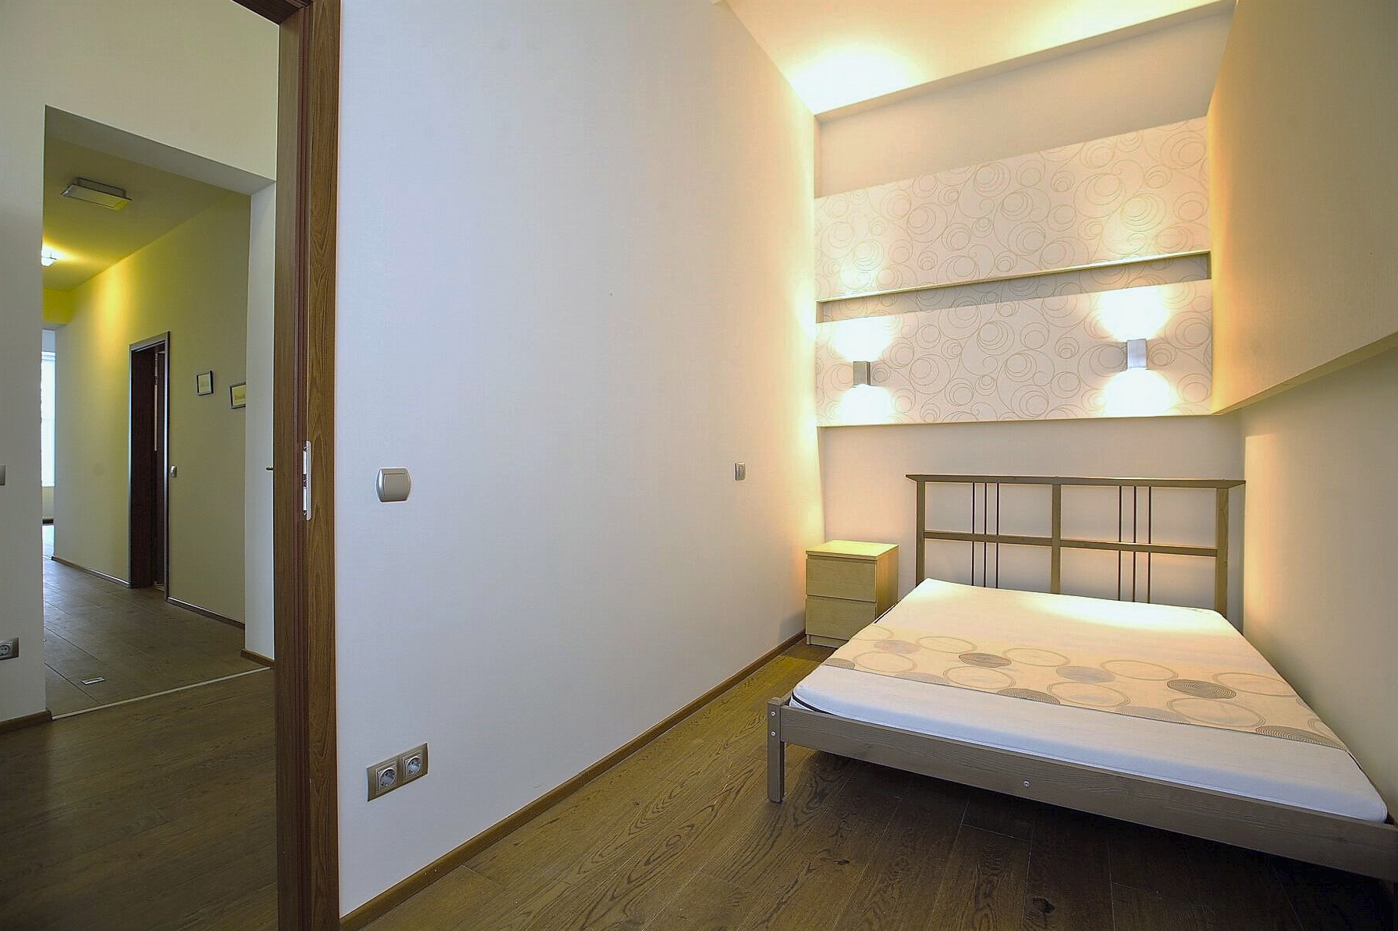 budapestrental-2-bedroom-apartment-for-rent-long-term-lease-district-6-flat-for-rent4